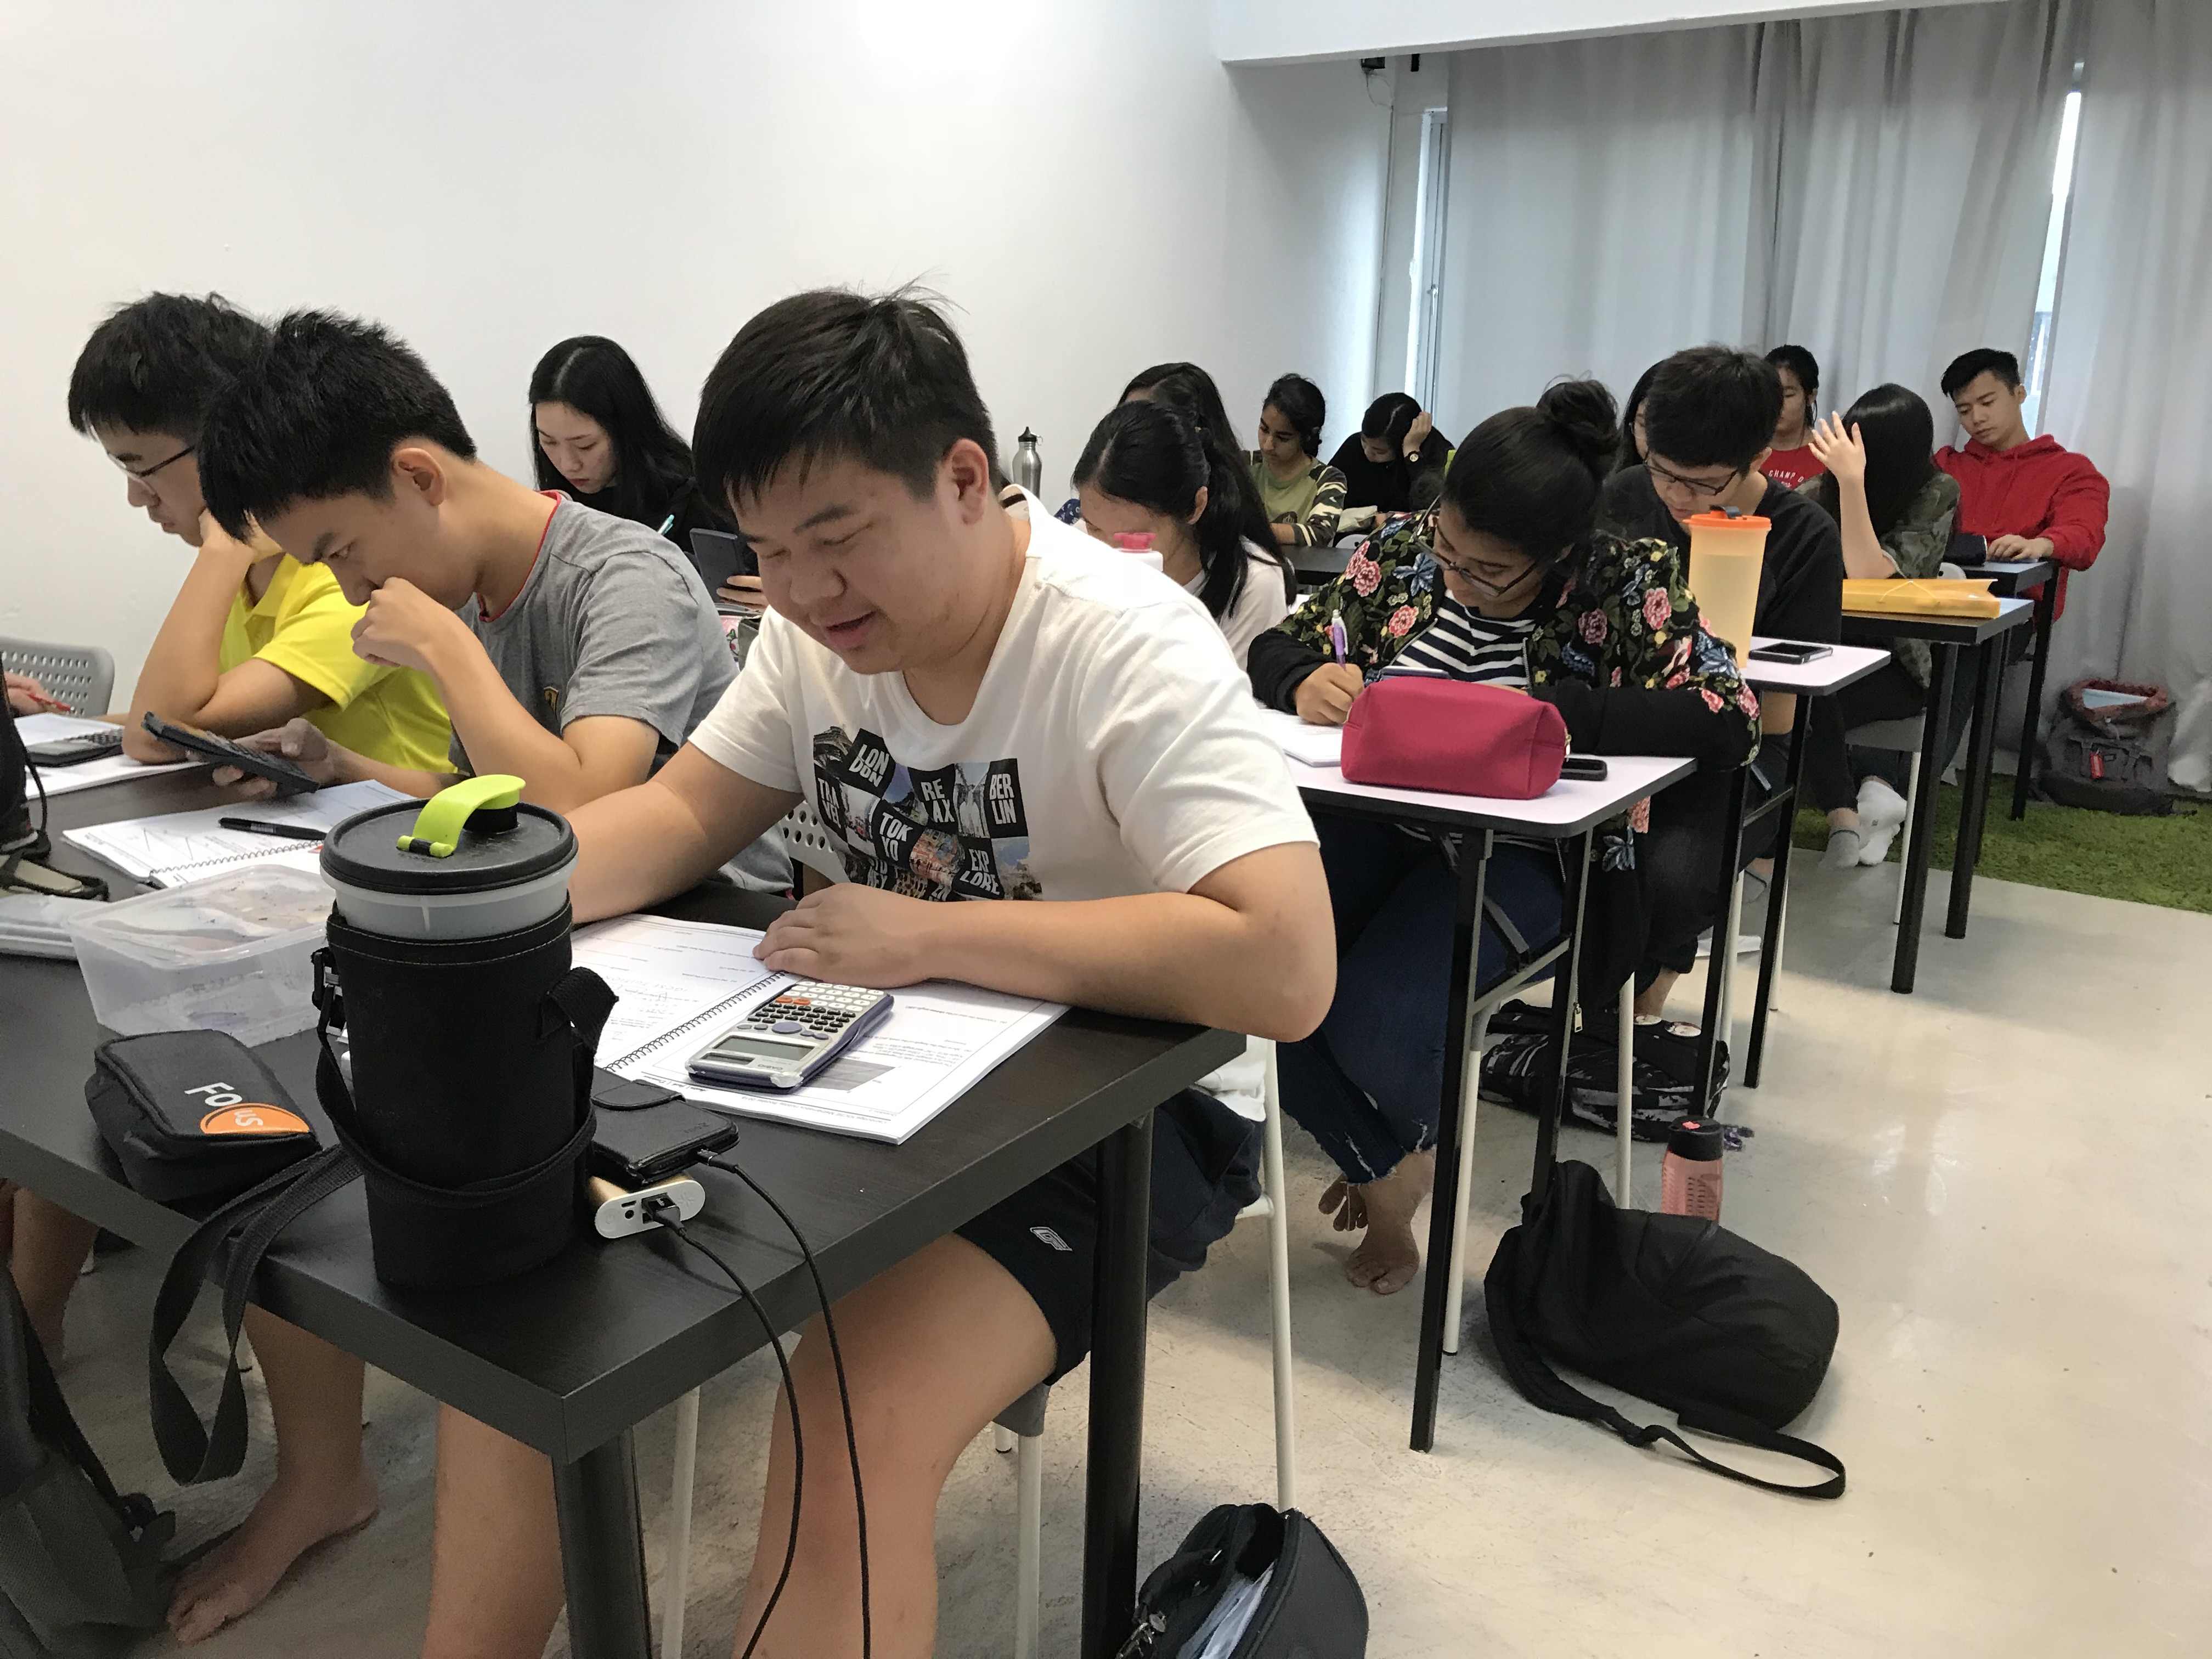 igcse intensive course,intensive course,igcse,igcse booster,igcse course malaysia,intensive booster 🏆 Booster - IGCSE Intensive Course Aug Sept 2022 VBest Year 1 to Year 13 Tuition Centre